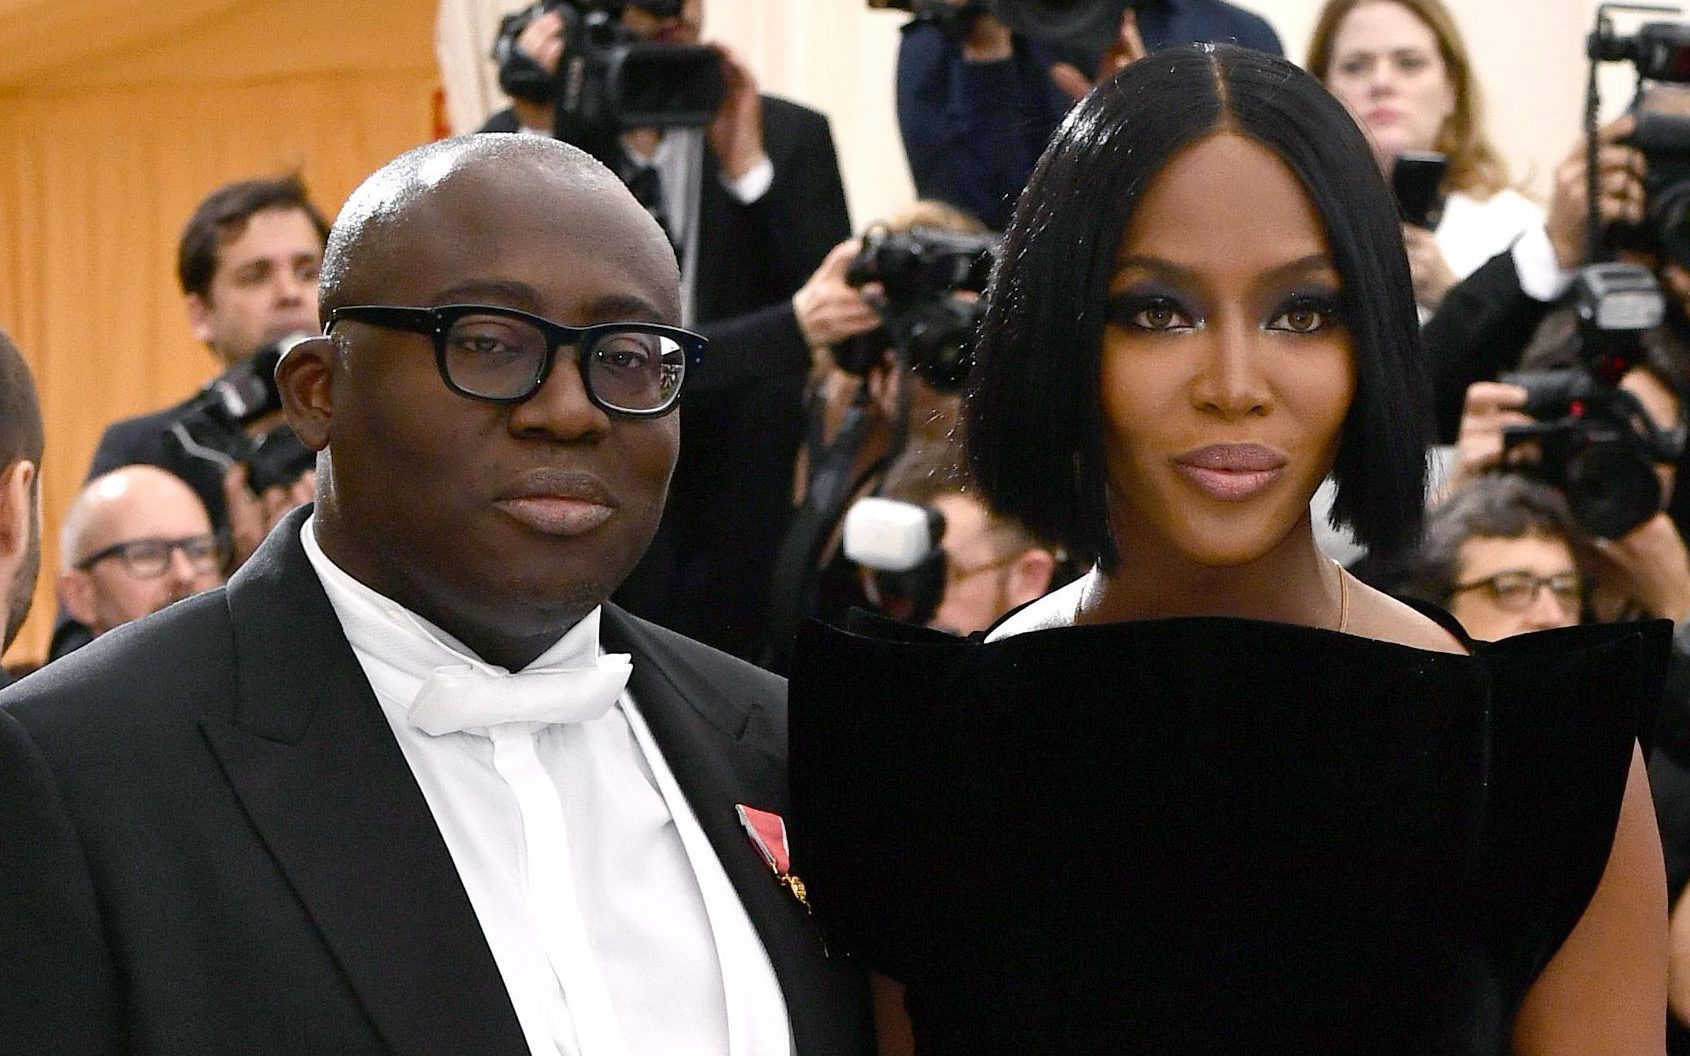 Edward Enninful’s time at British Vogue has shown us fashion is more ...